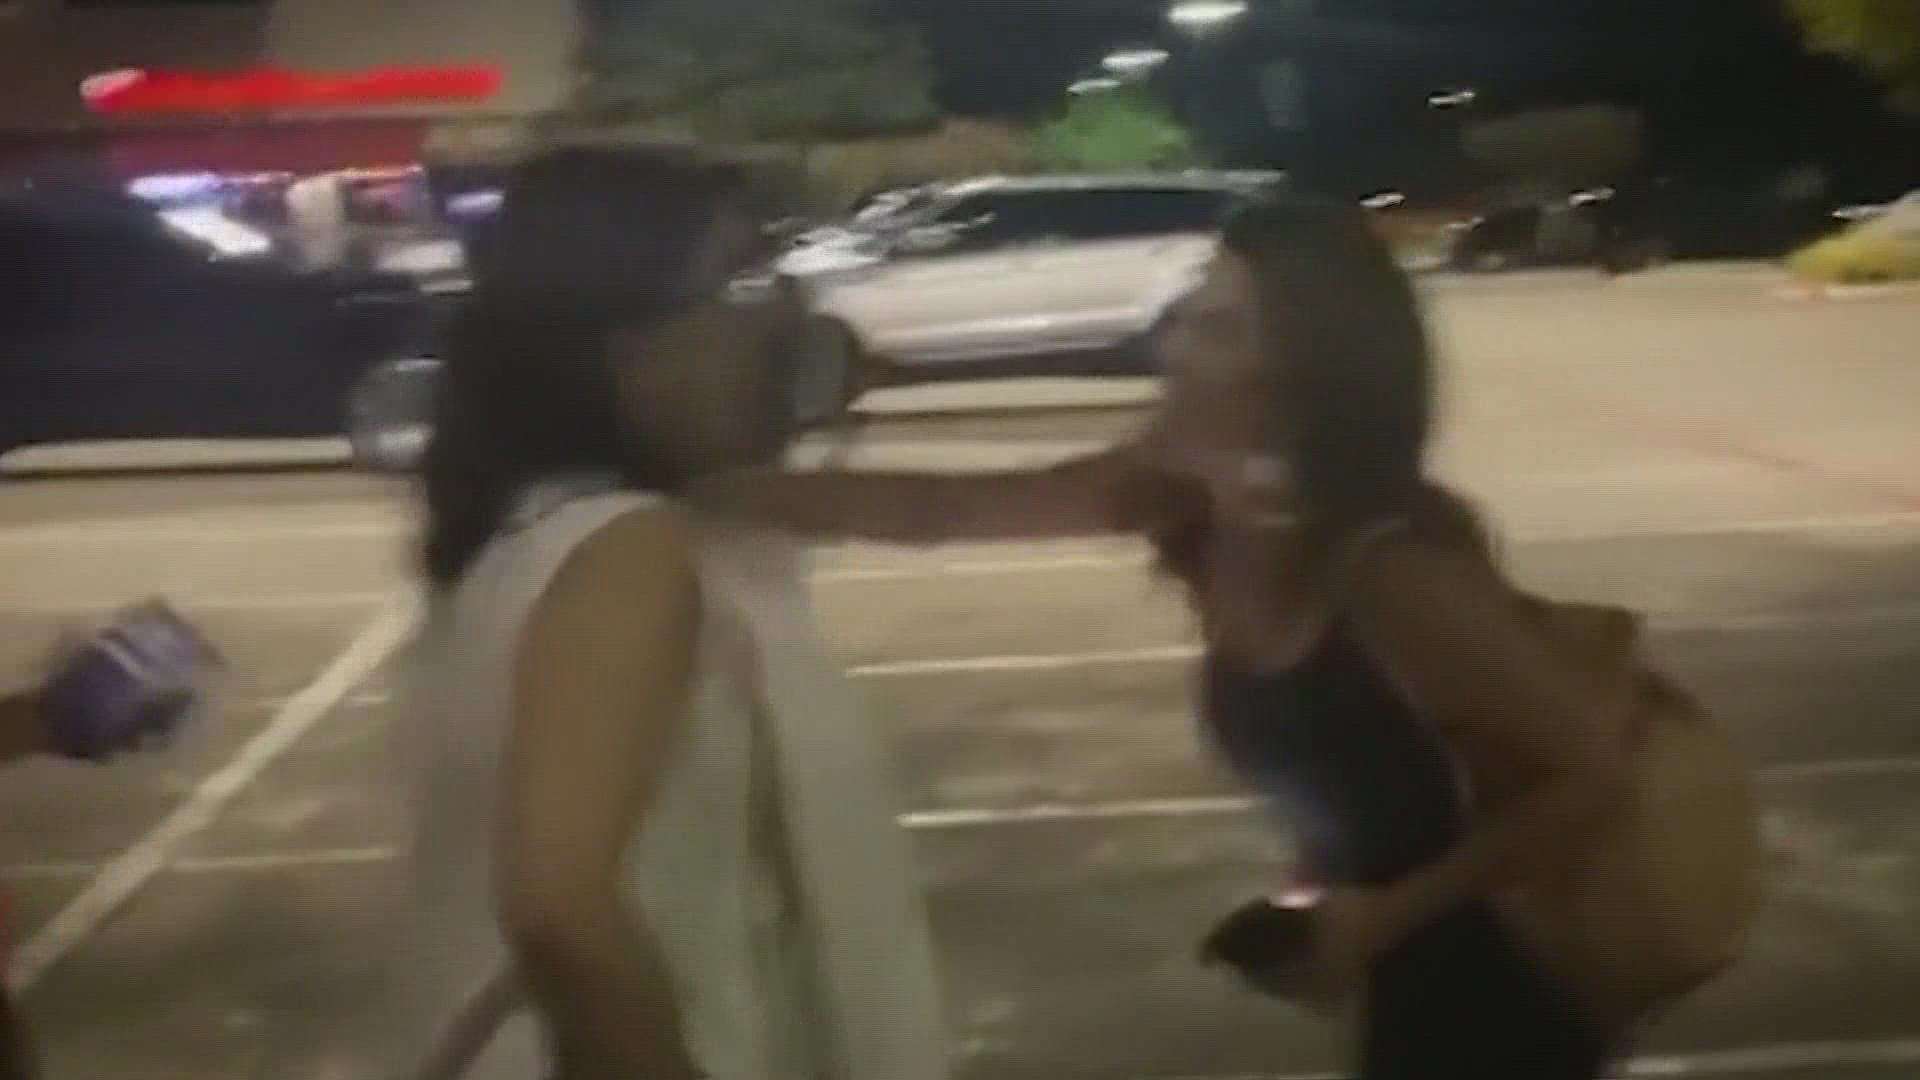 The tirade happened outside of a restaurant in Plano.